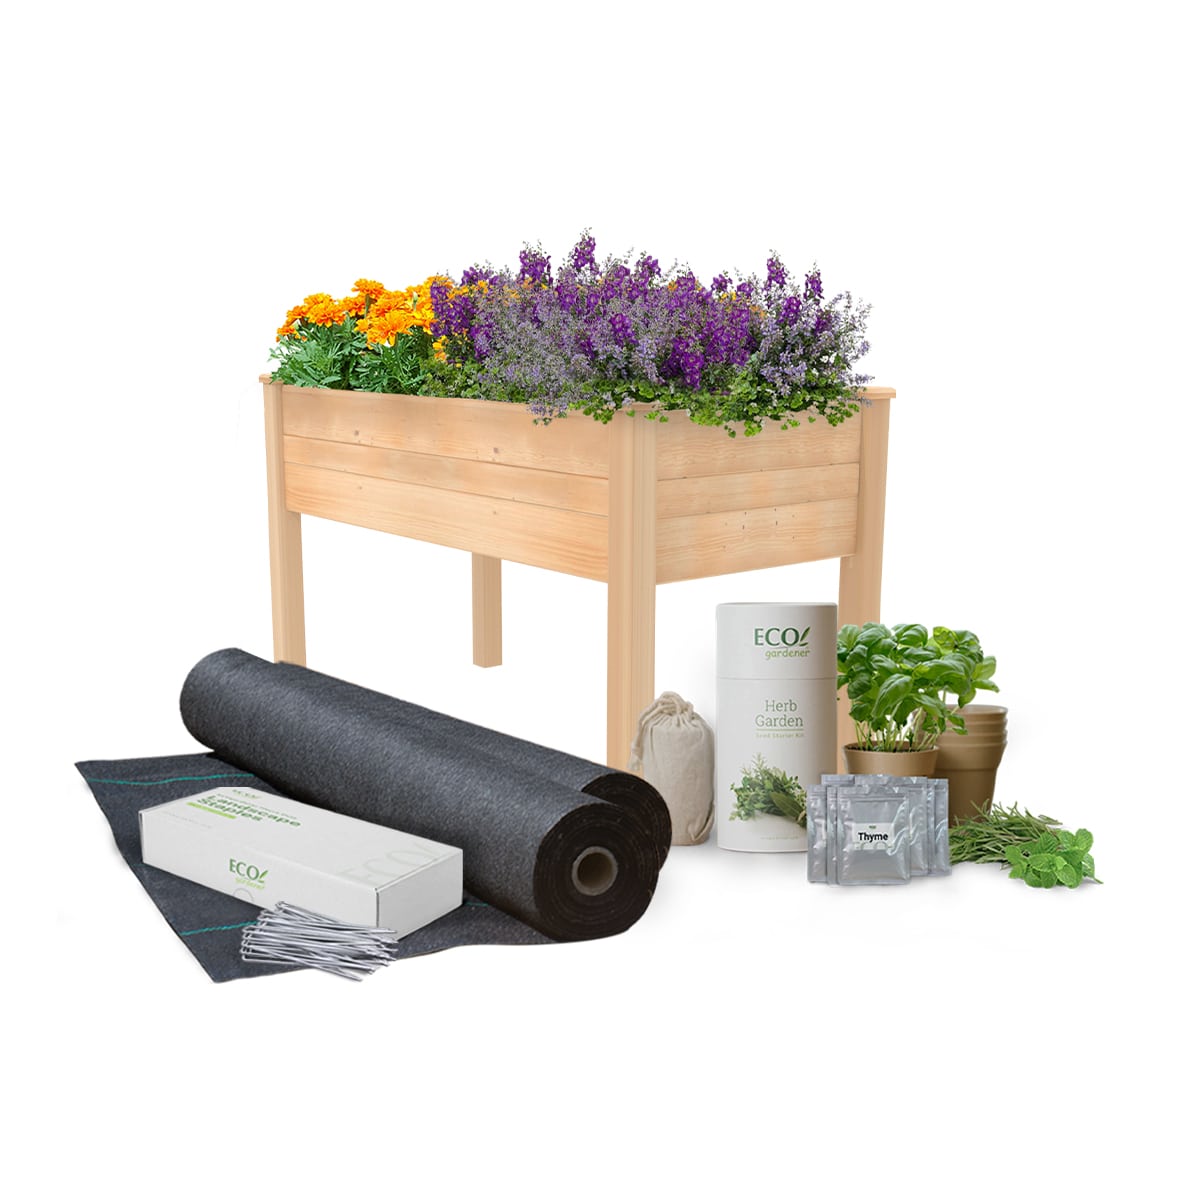 Complete Herb Garden Starter Kit Bundle with Elevated Raised Bed